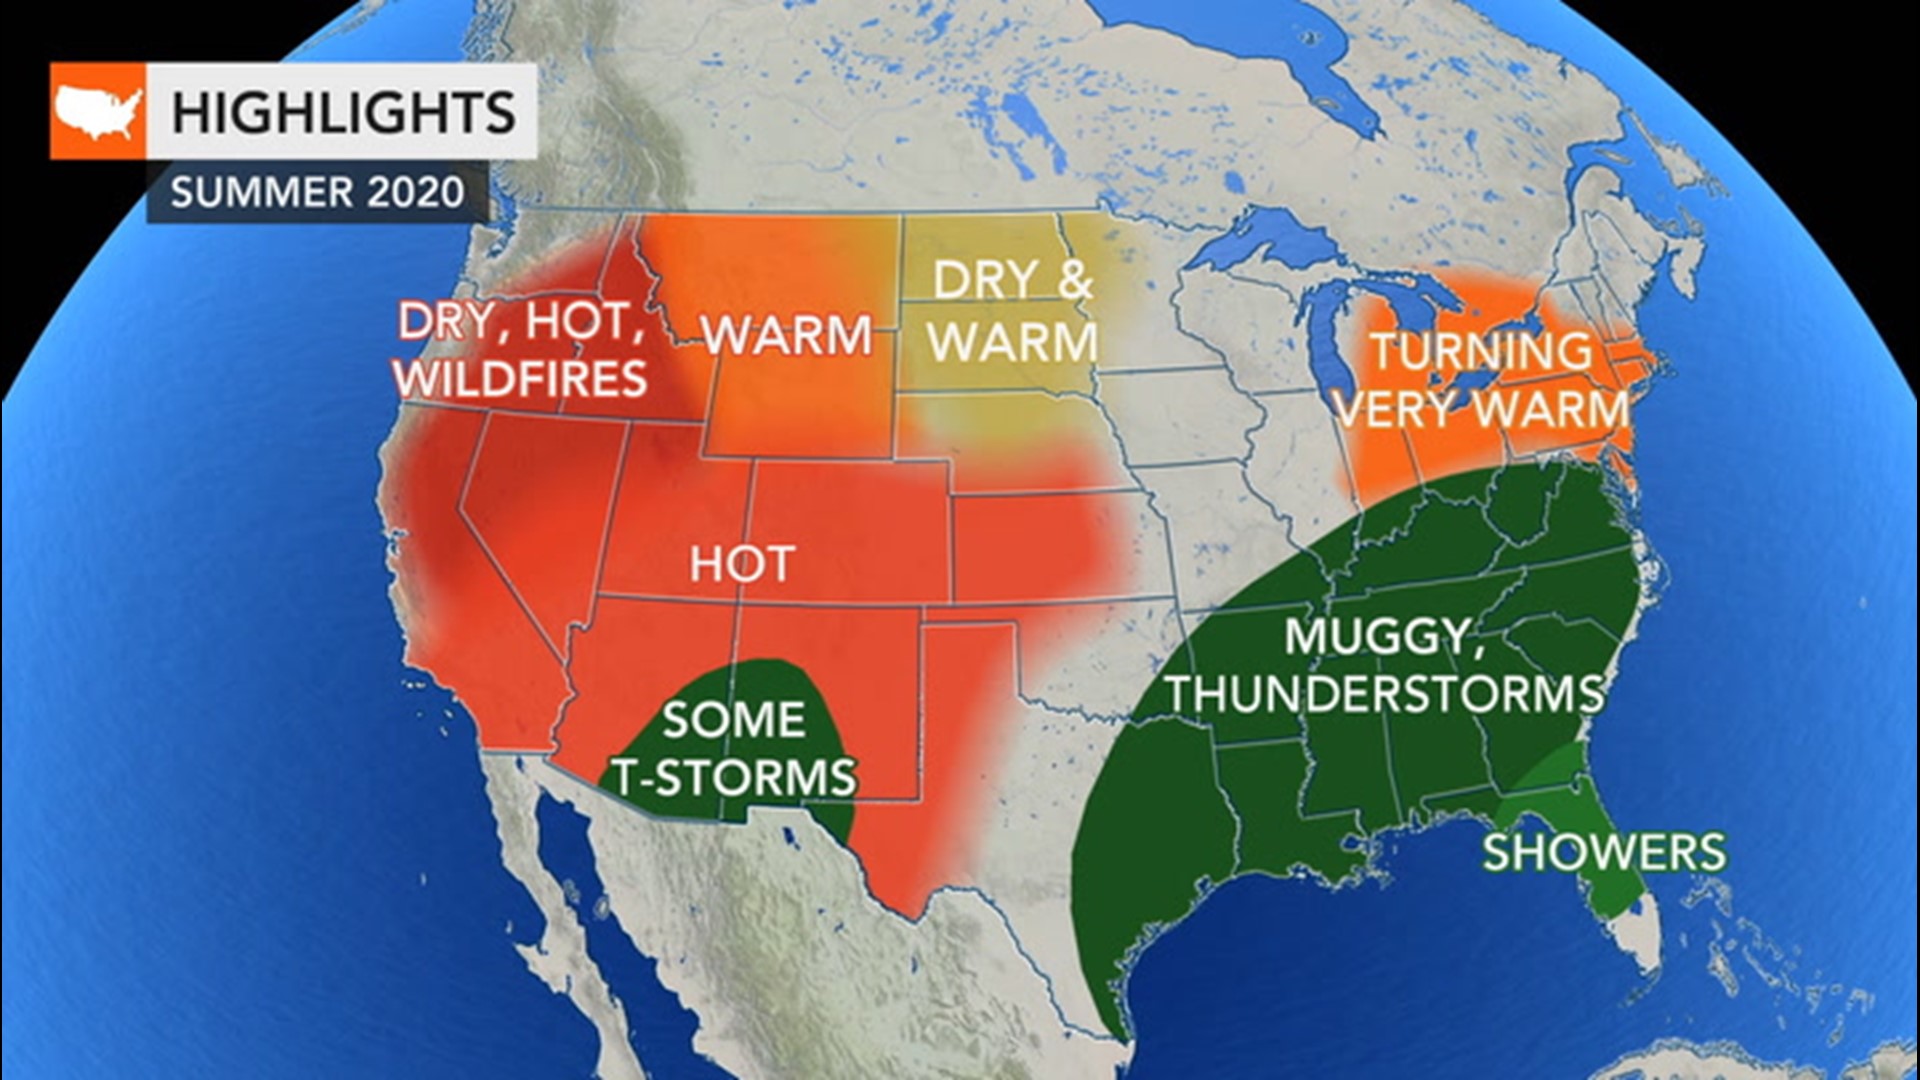 What will the weather be like this summer? Find out in AccuWeather's 2020 summer forecast.